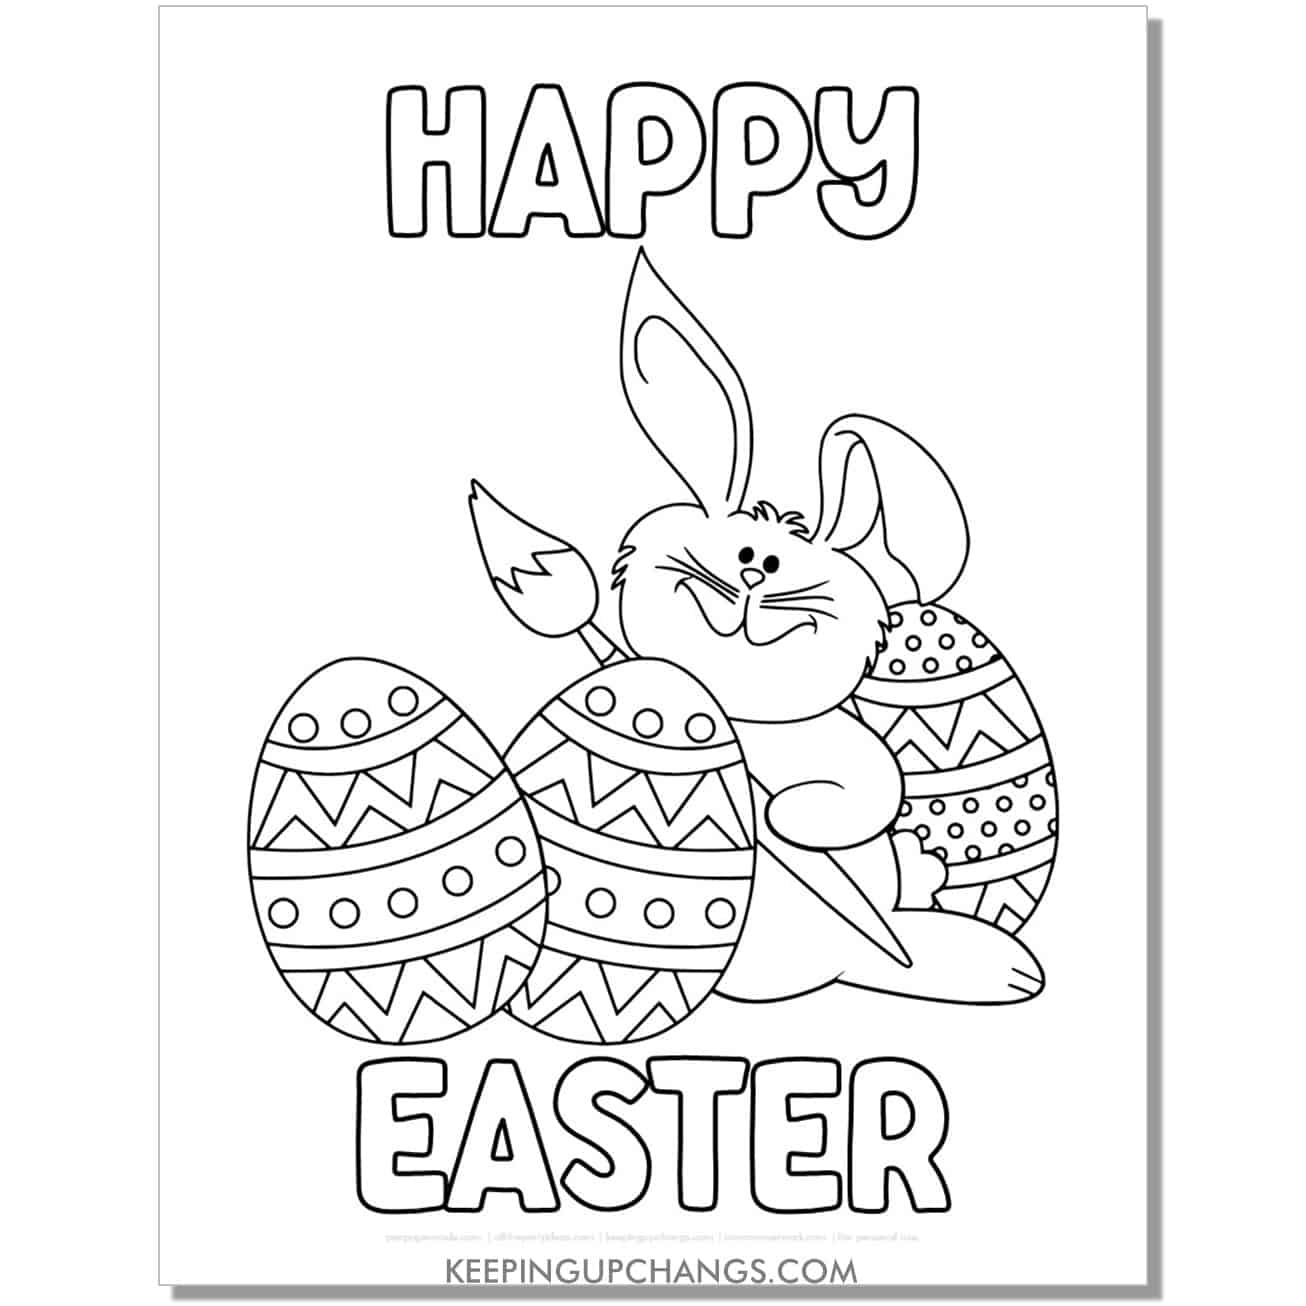 happy easter bunny with paintbrush for eggs coloring page, sheet.